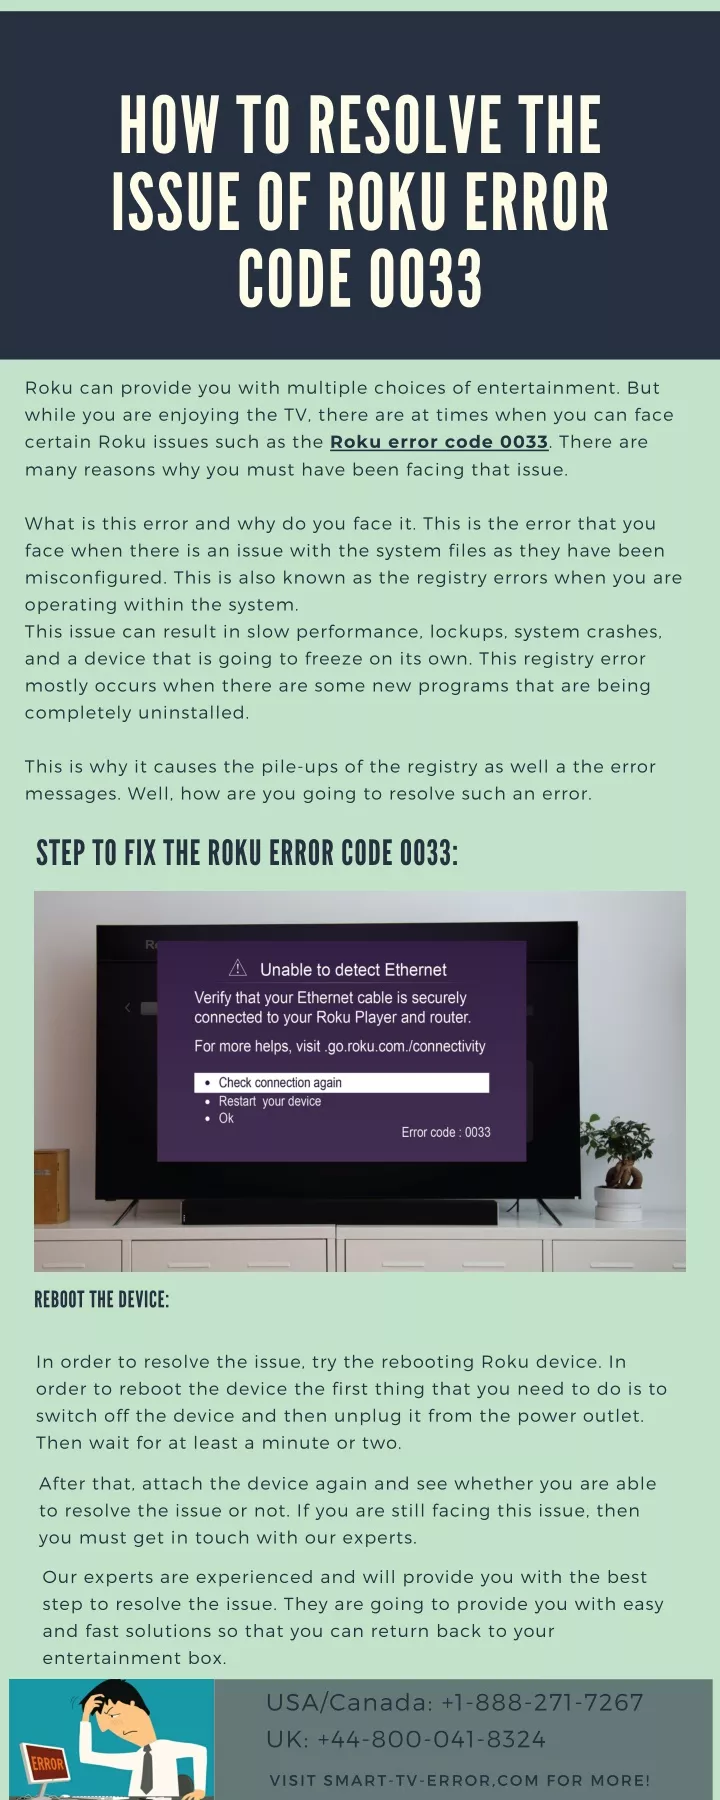 how to resolve the issue of roku error code 0033